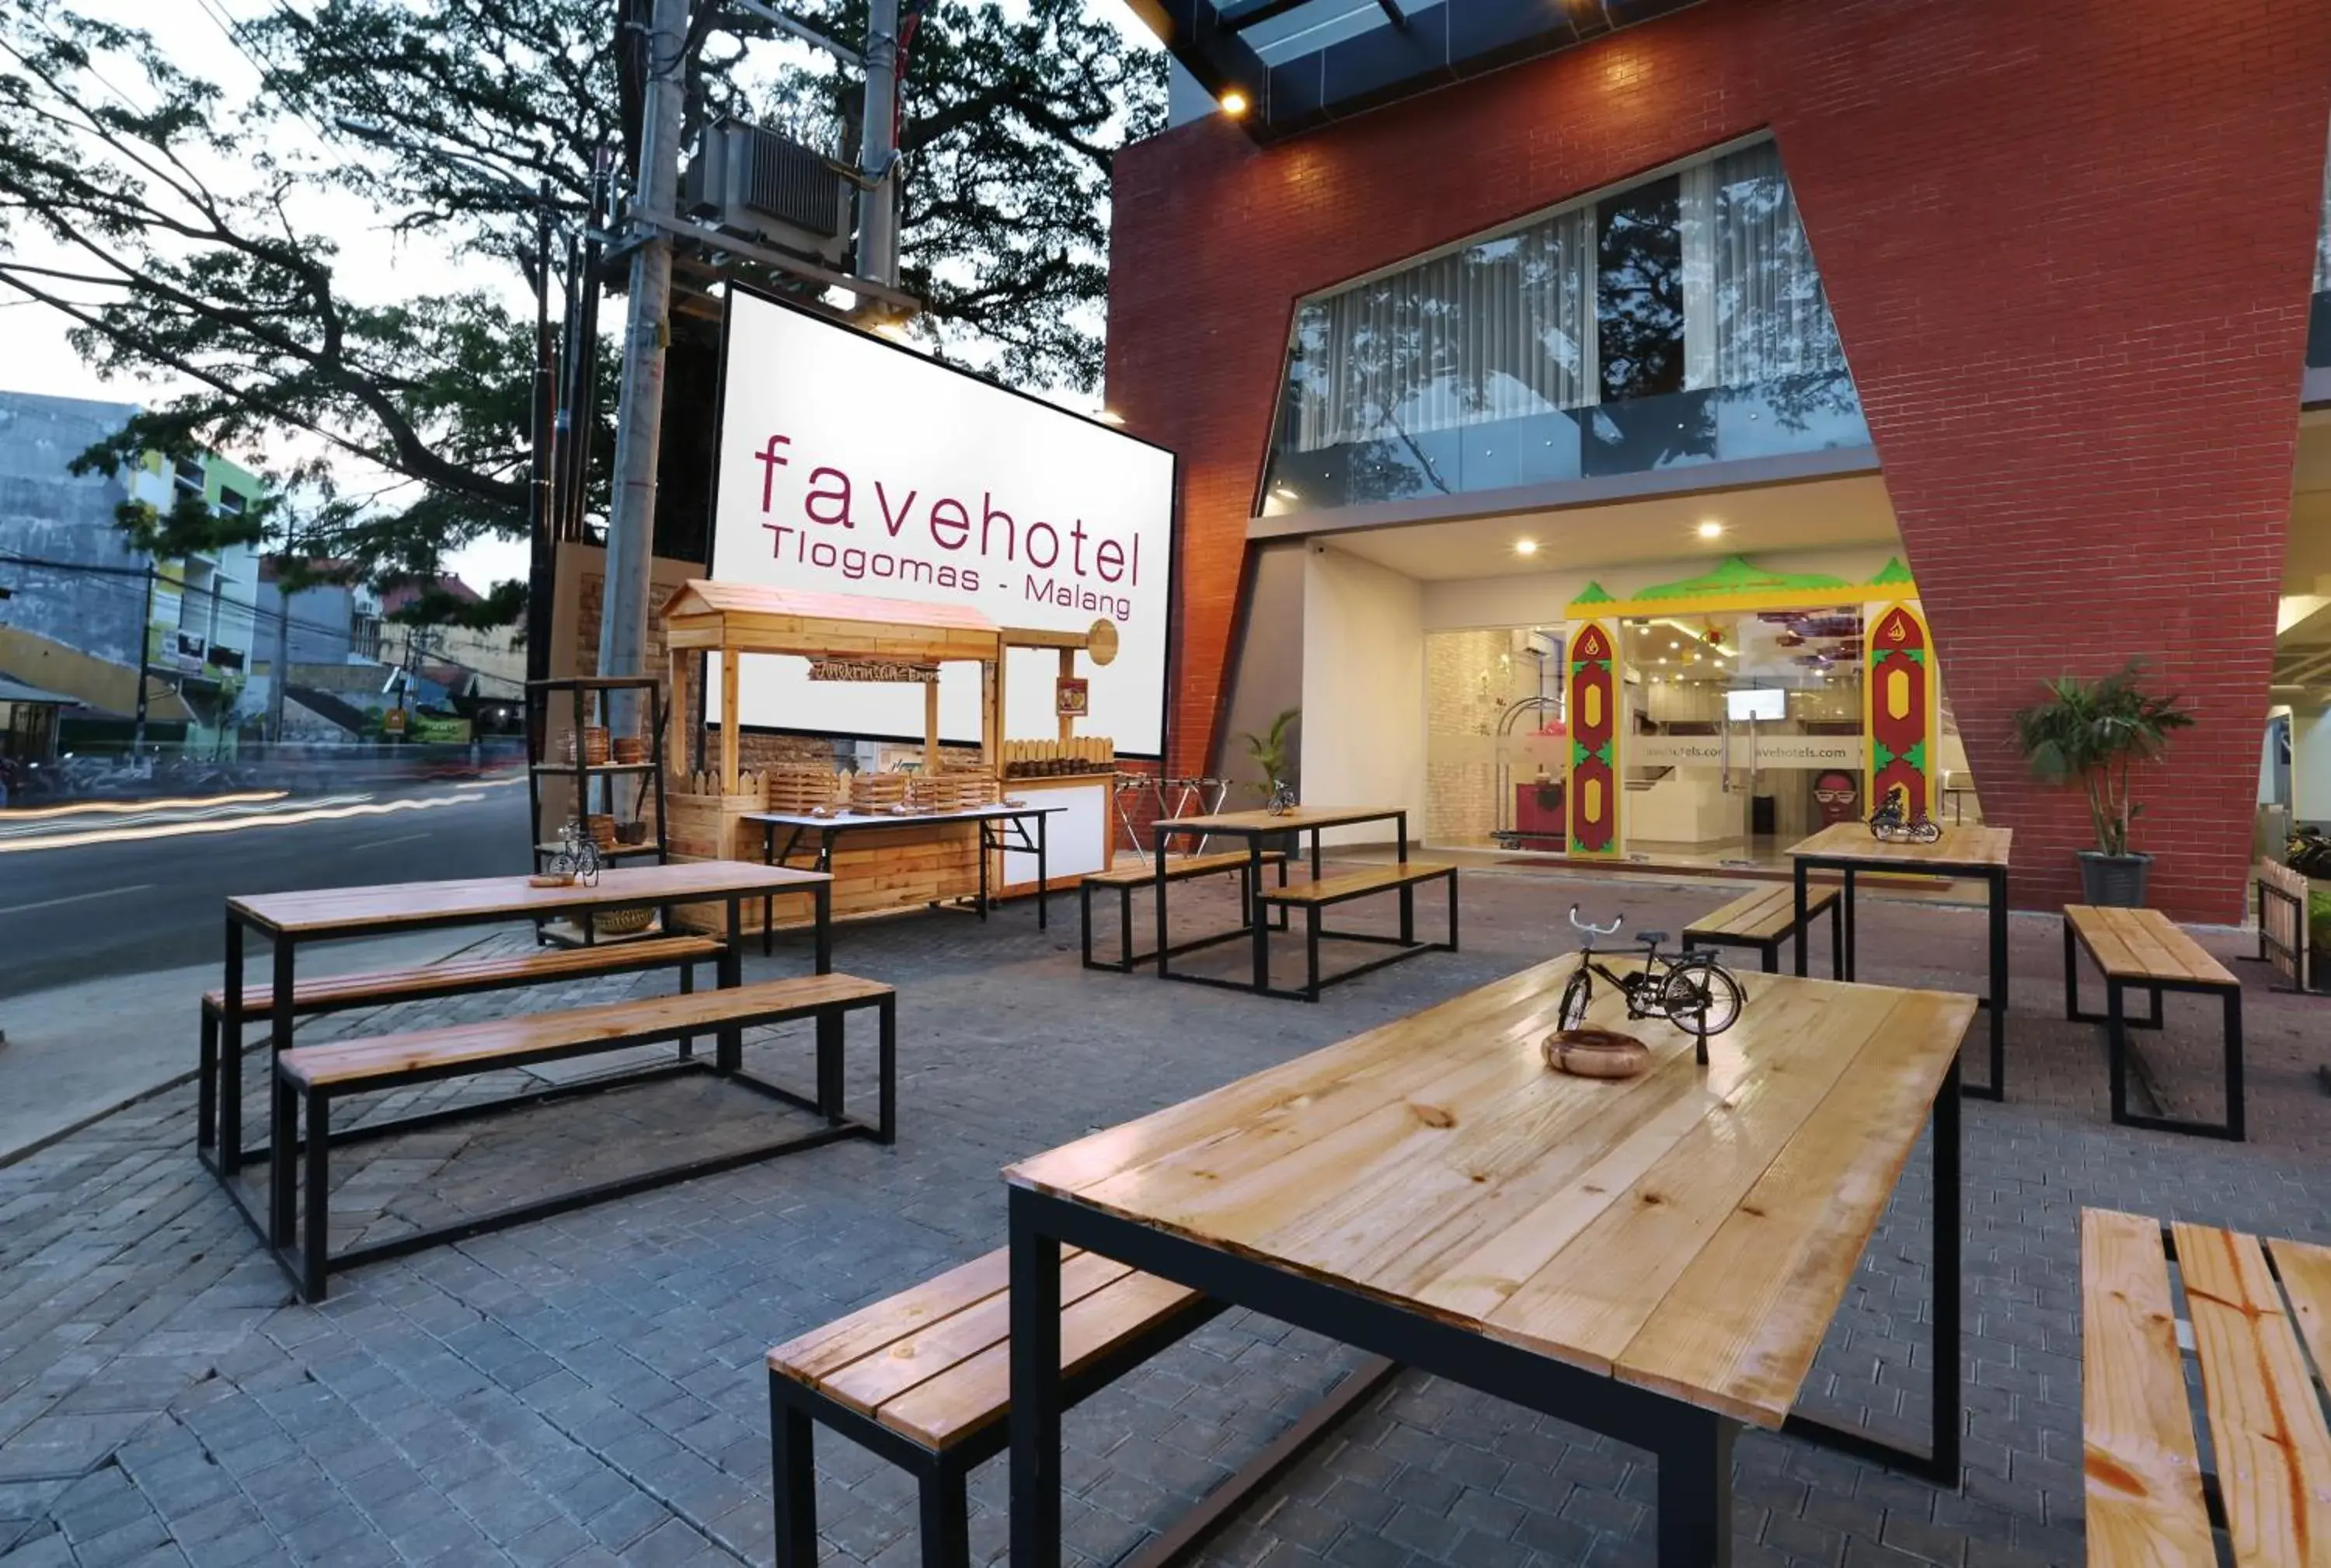 Restaurant/places to eat in favehotel Tlogomas Malang